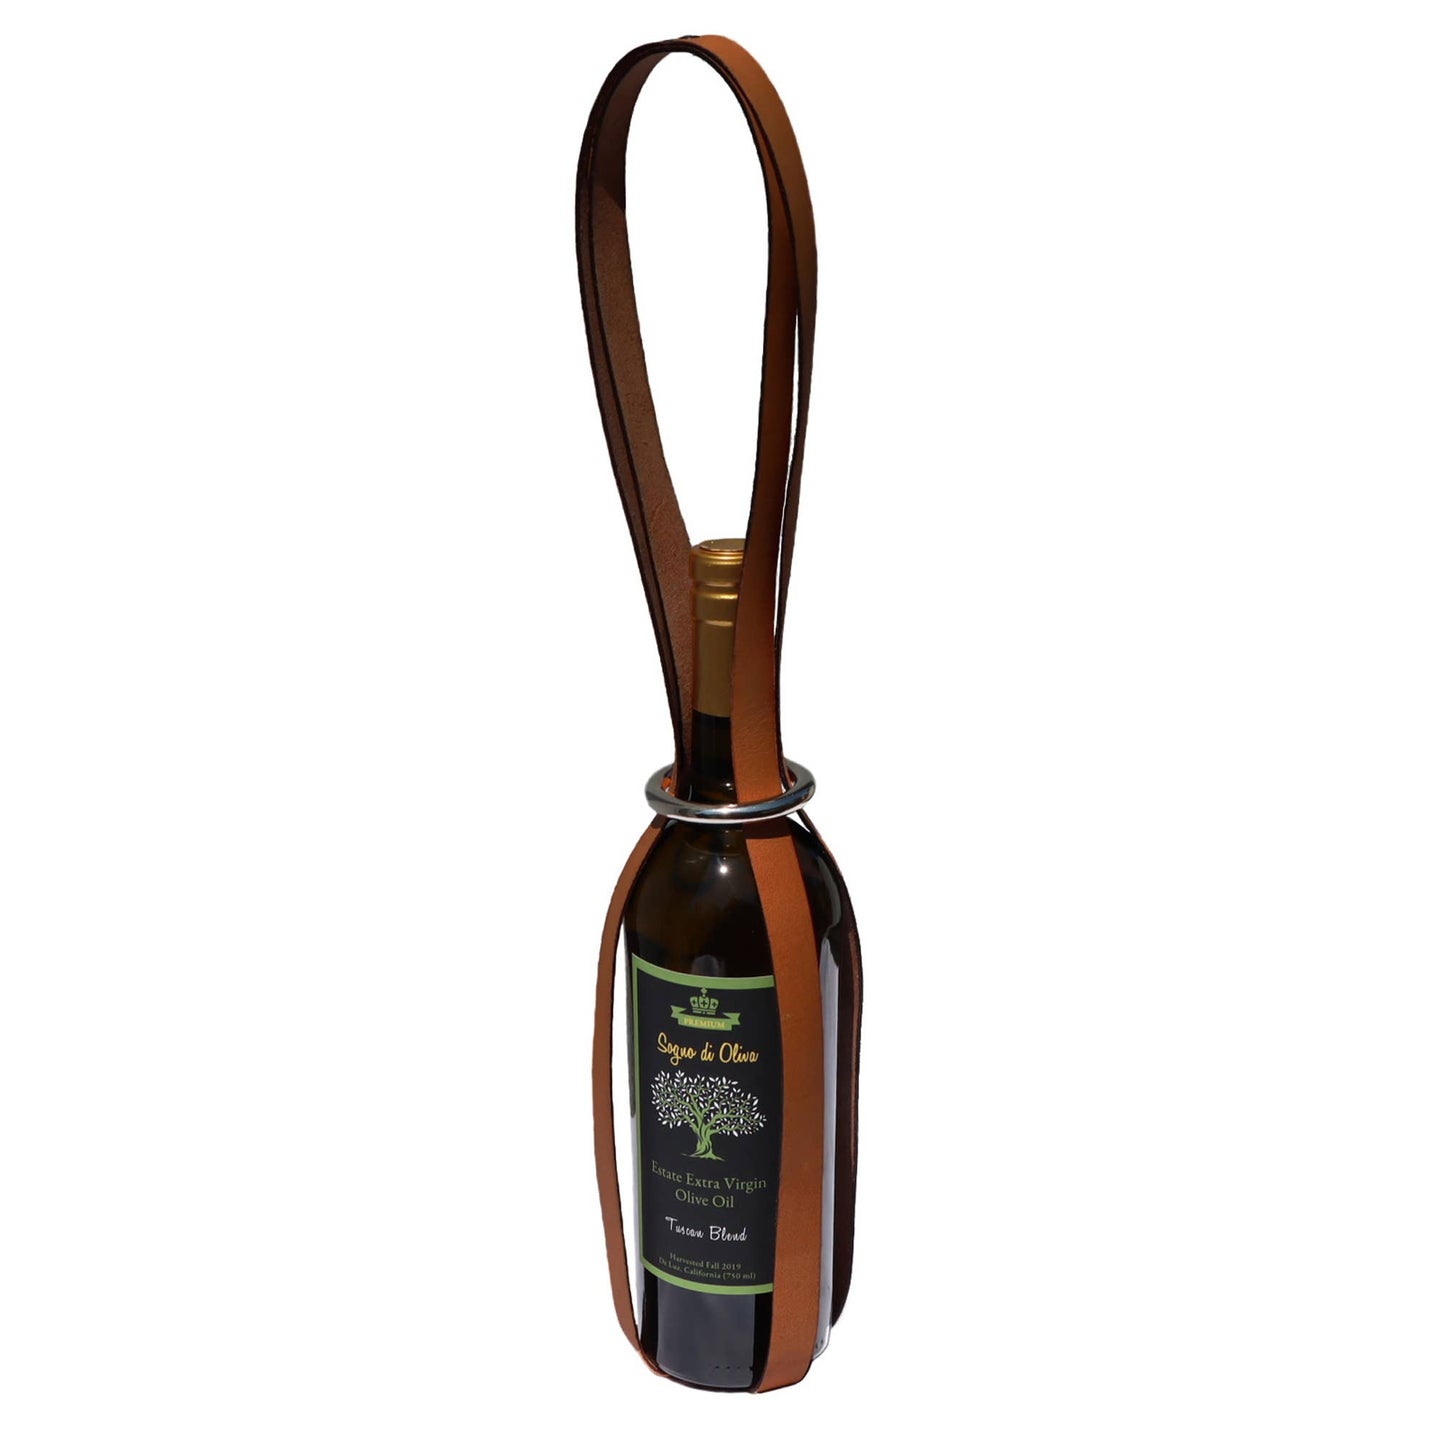 Leather Single Bottle Wine Carrier, Brown Leather Wine Bag